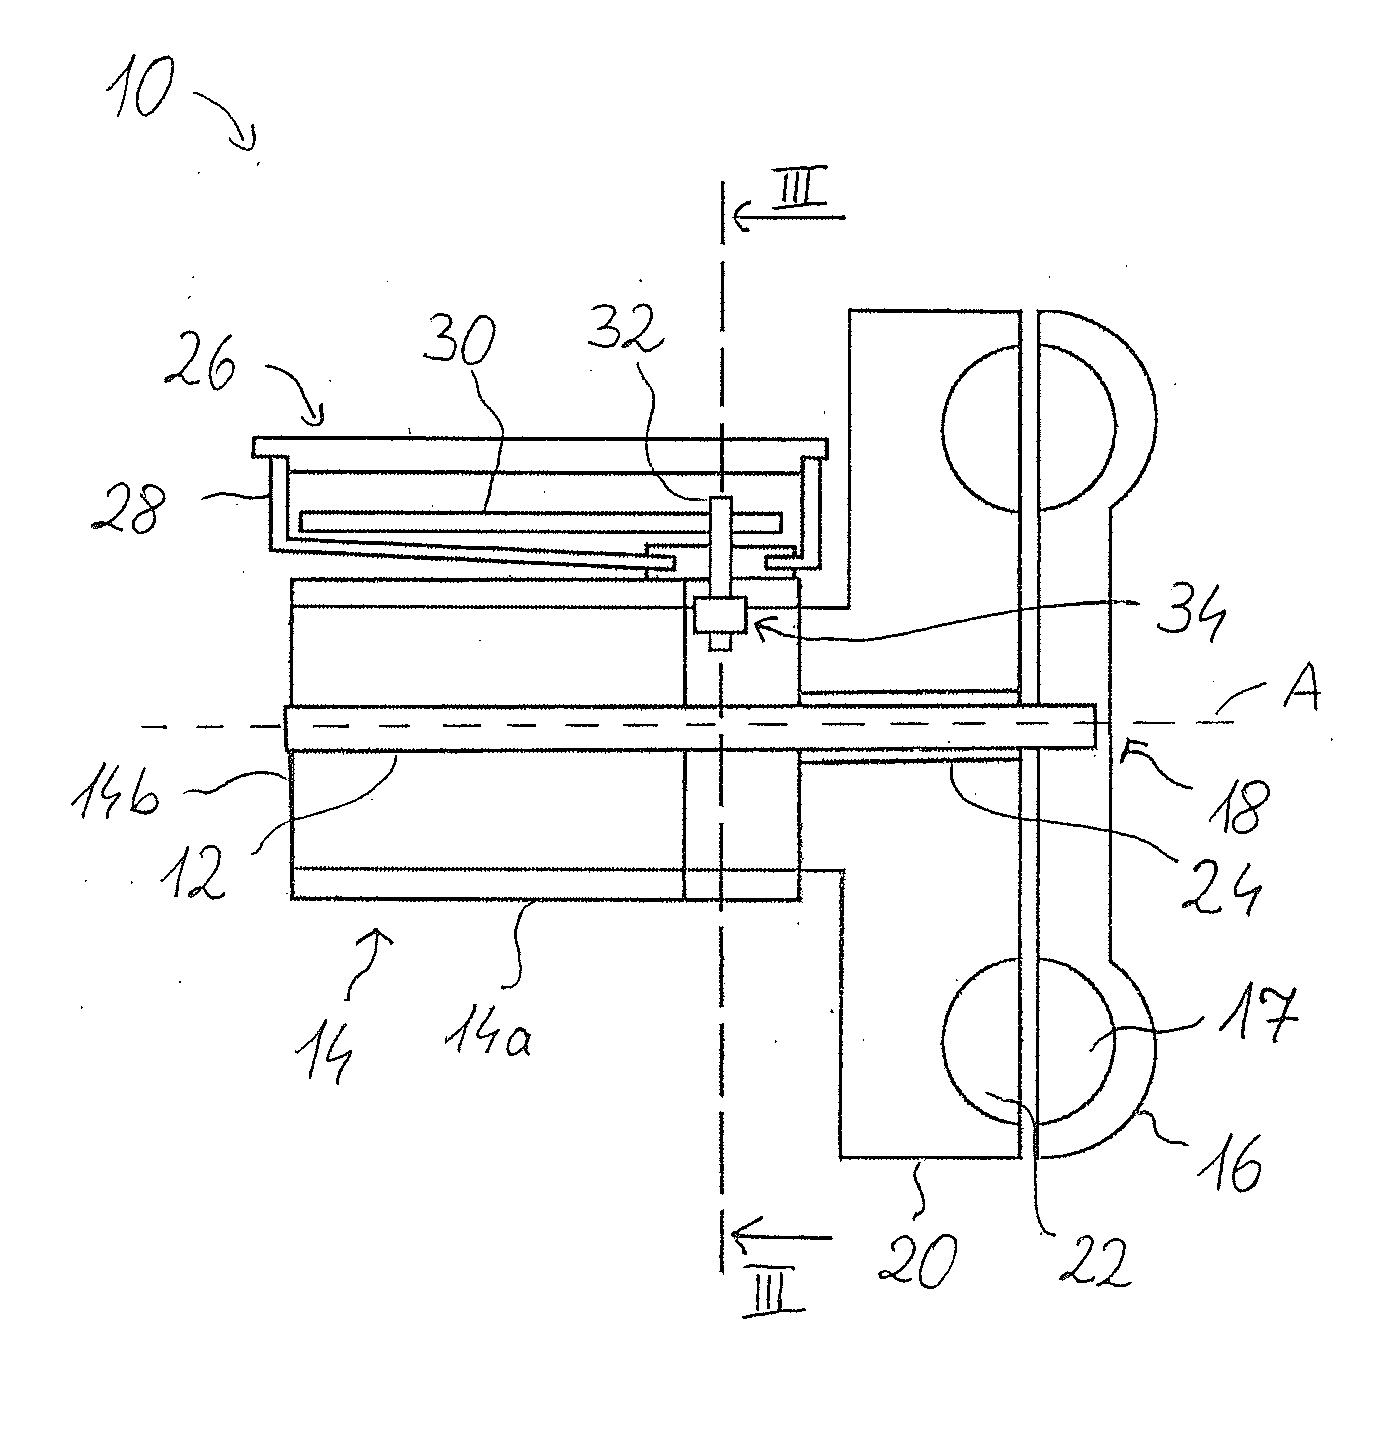 Air feed blower, especially for a vehicle heater